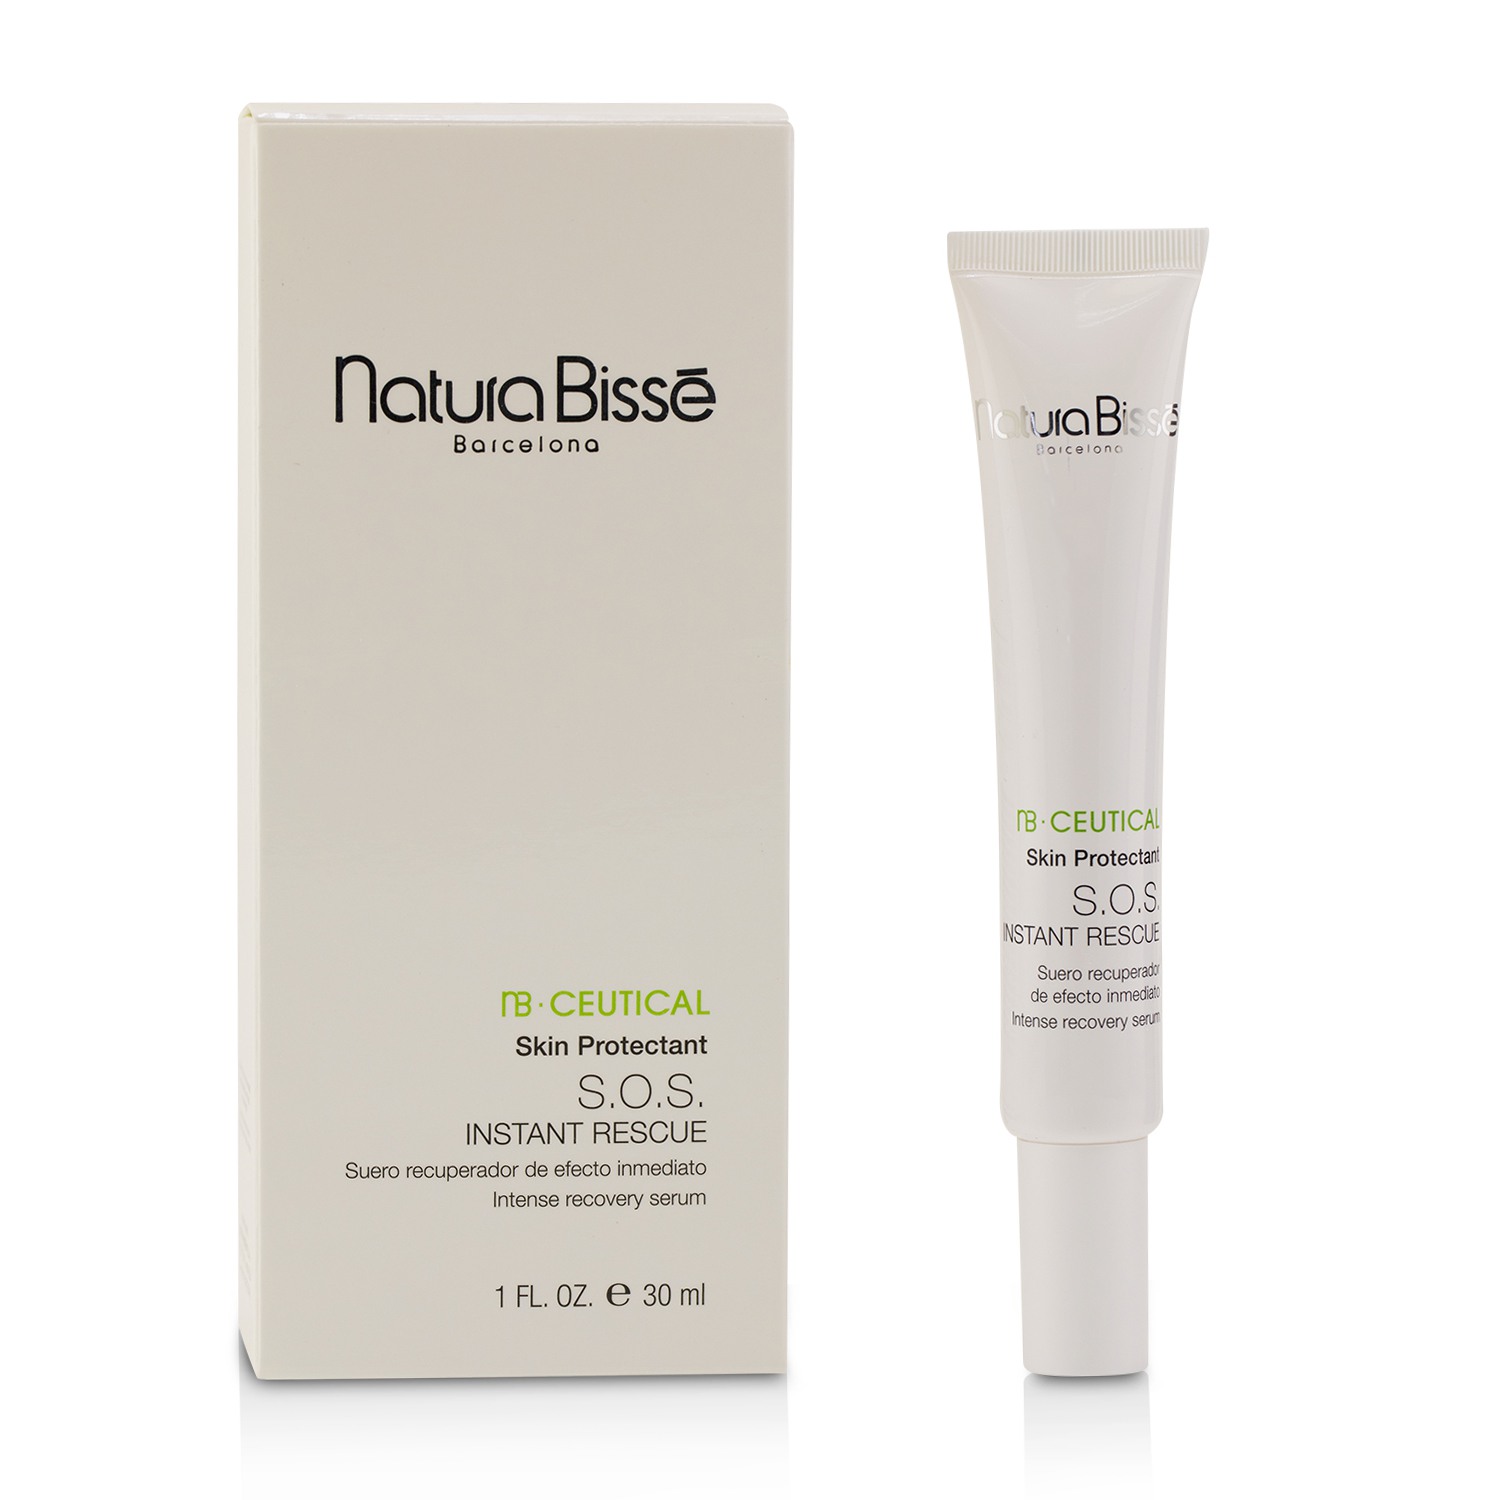 NB Ceutical Skin Protectant S.O.S. Instant Rescue Natura Bisse Image